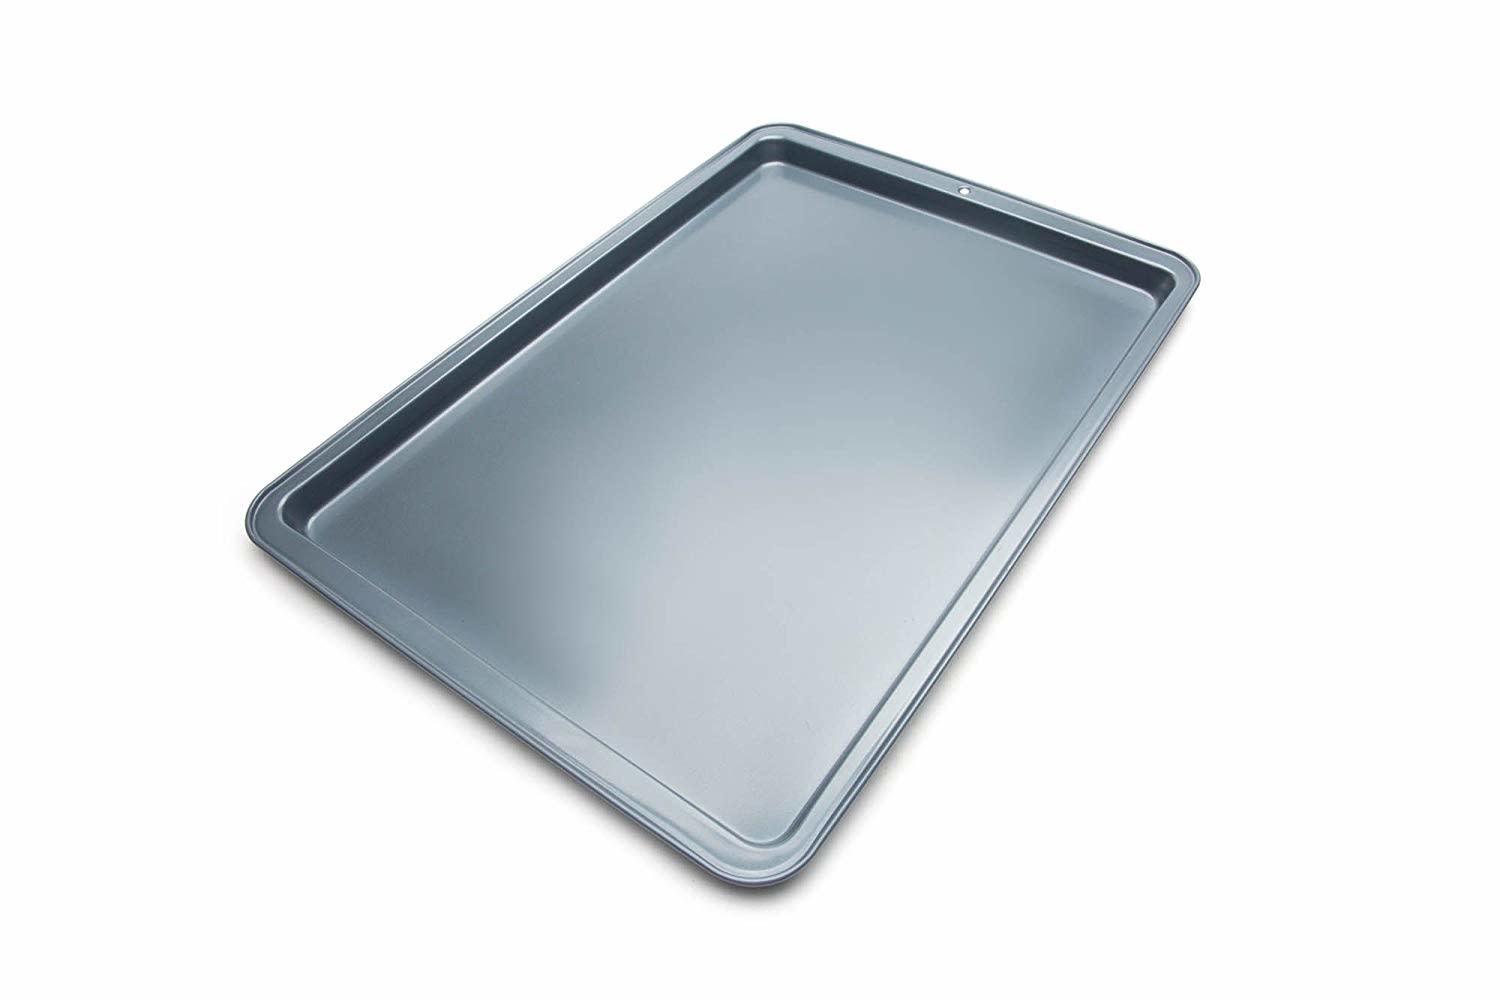 121869 Blue G Cookie/Jelly Roll Pan 11 X 17